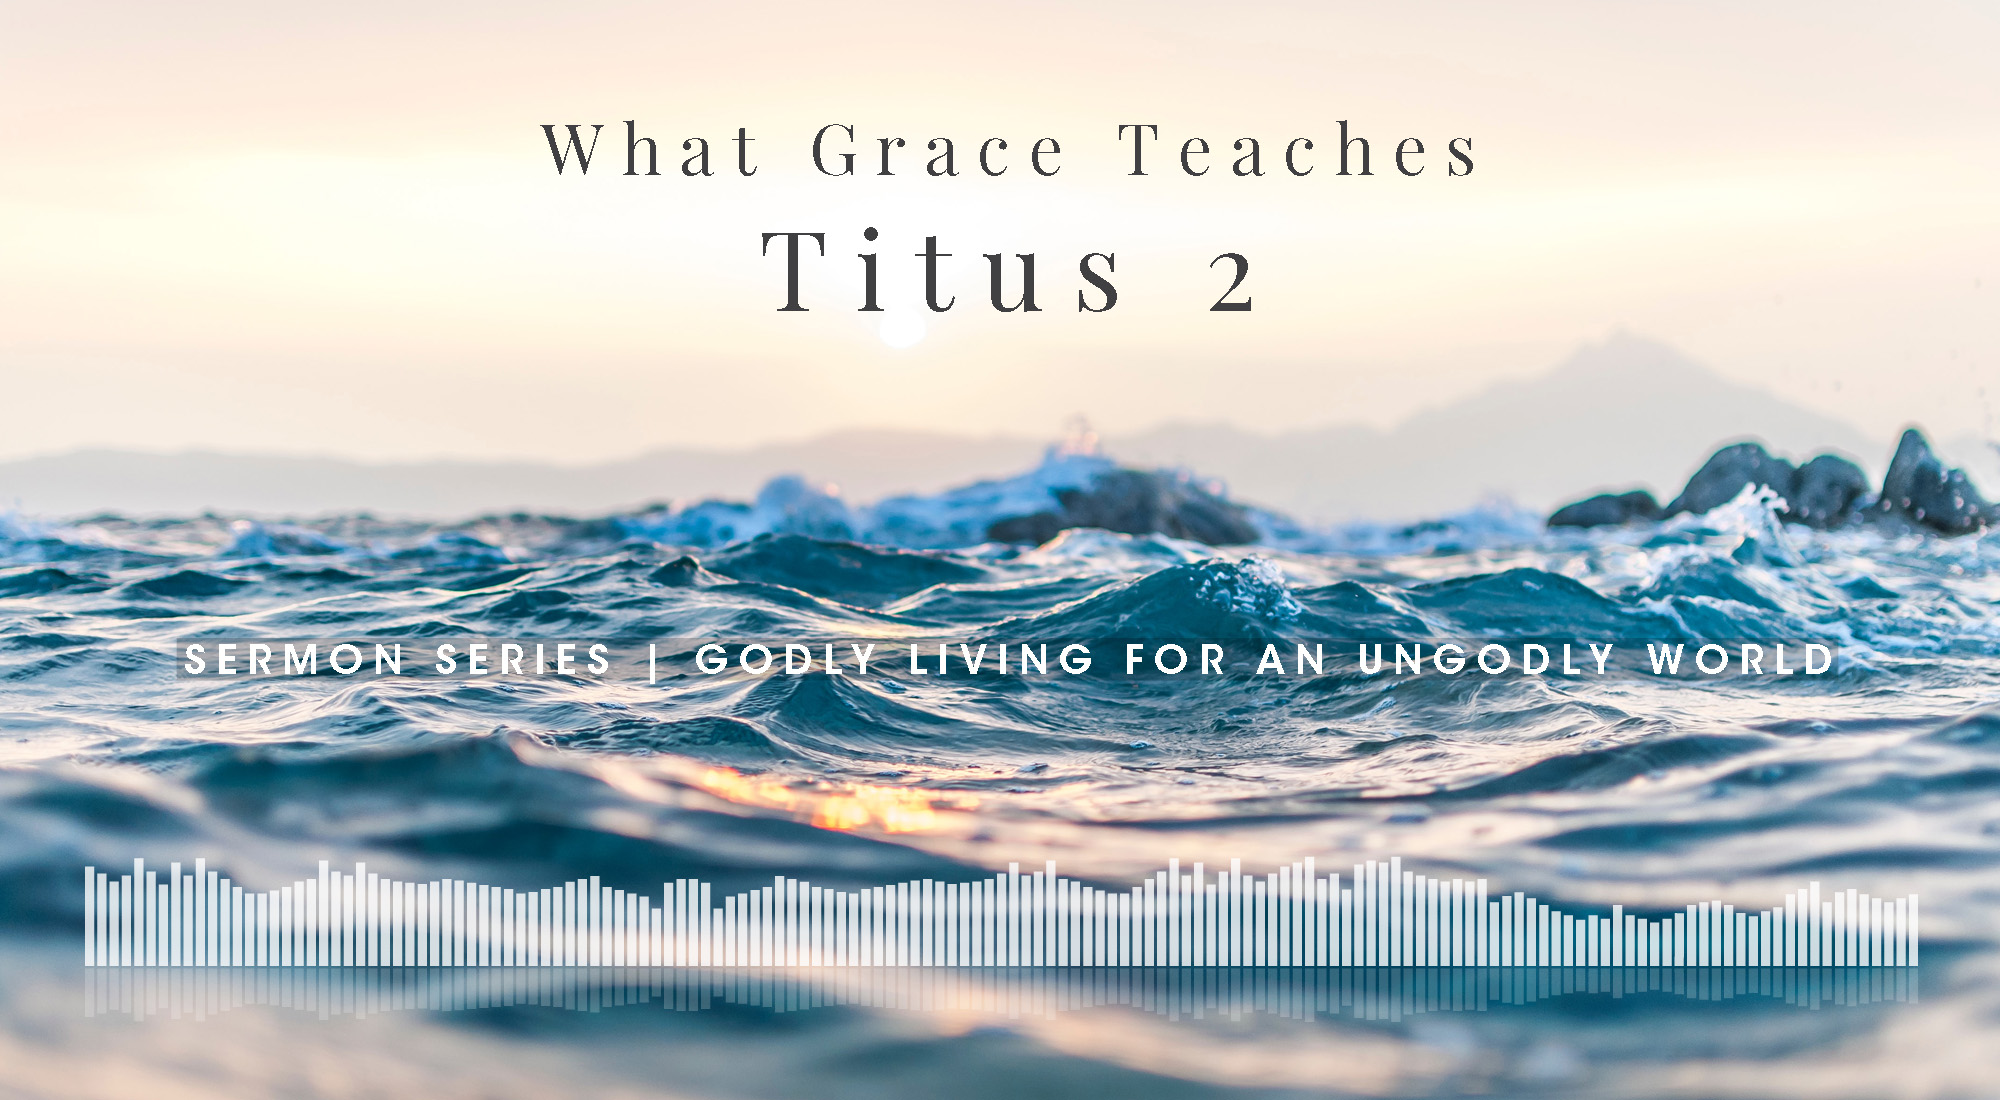 Sermon Series Titus 2, Godly Living In An UnGodly World